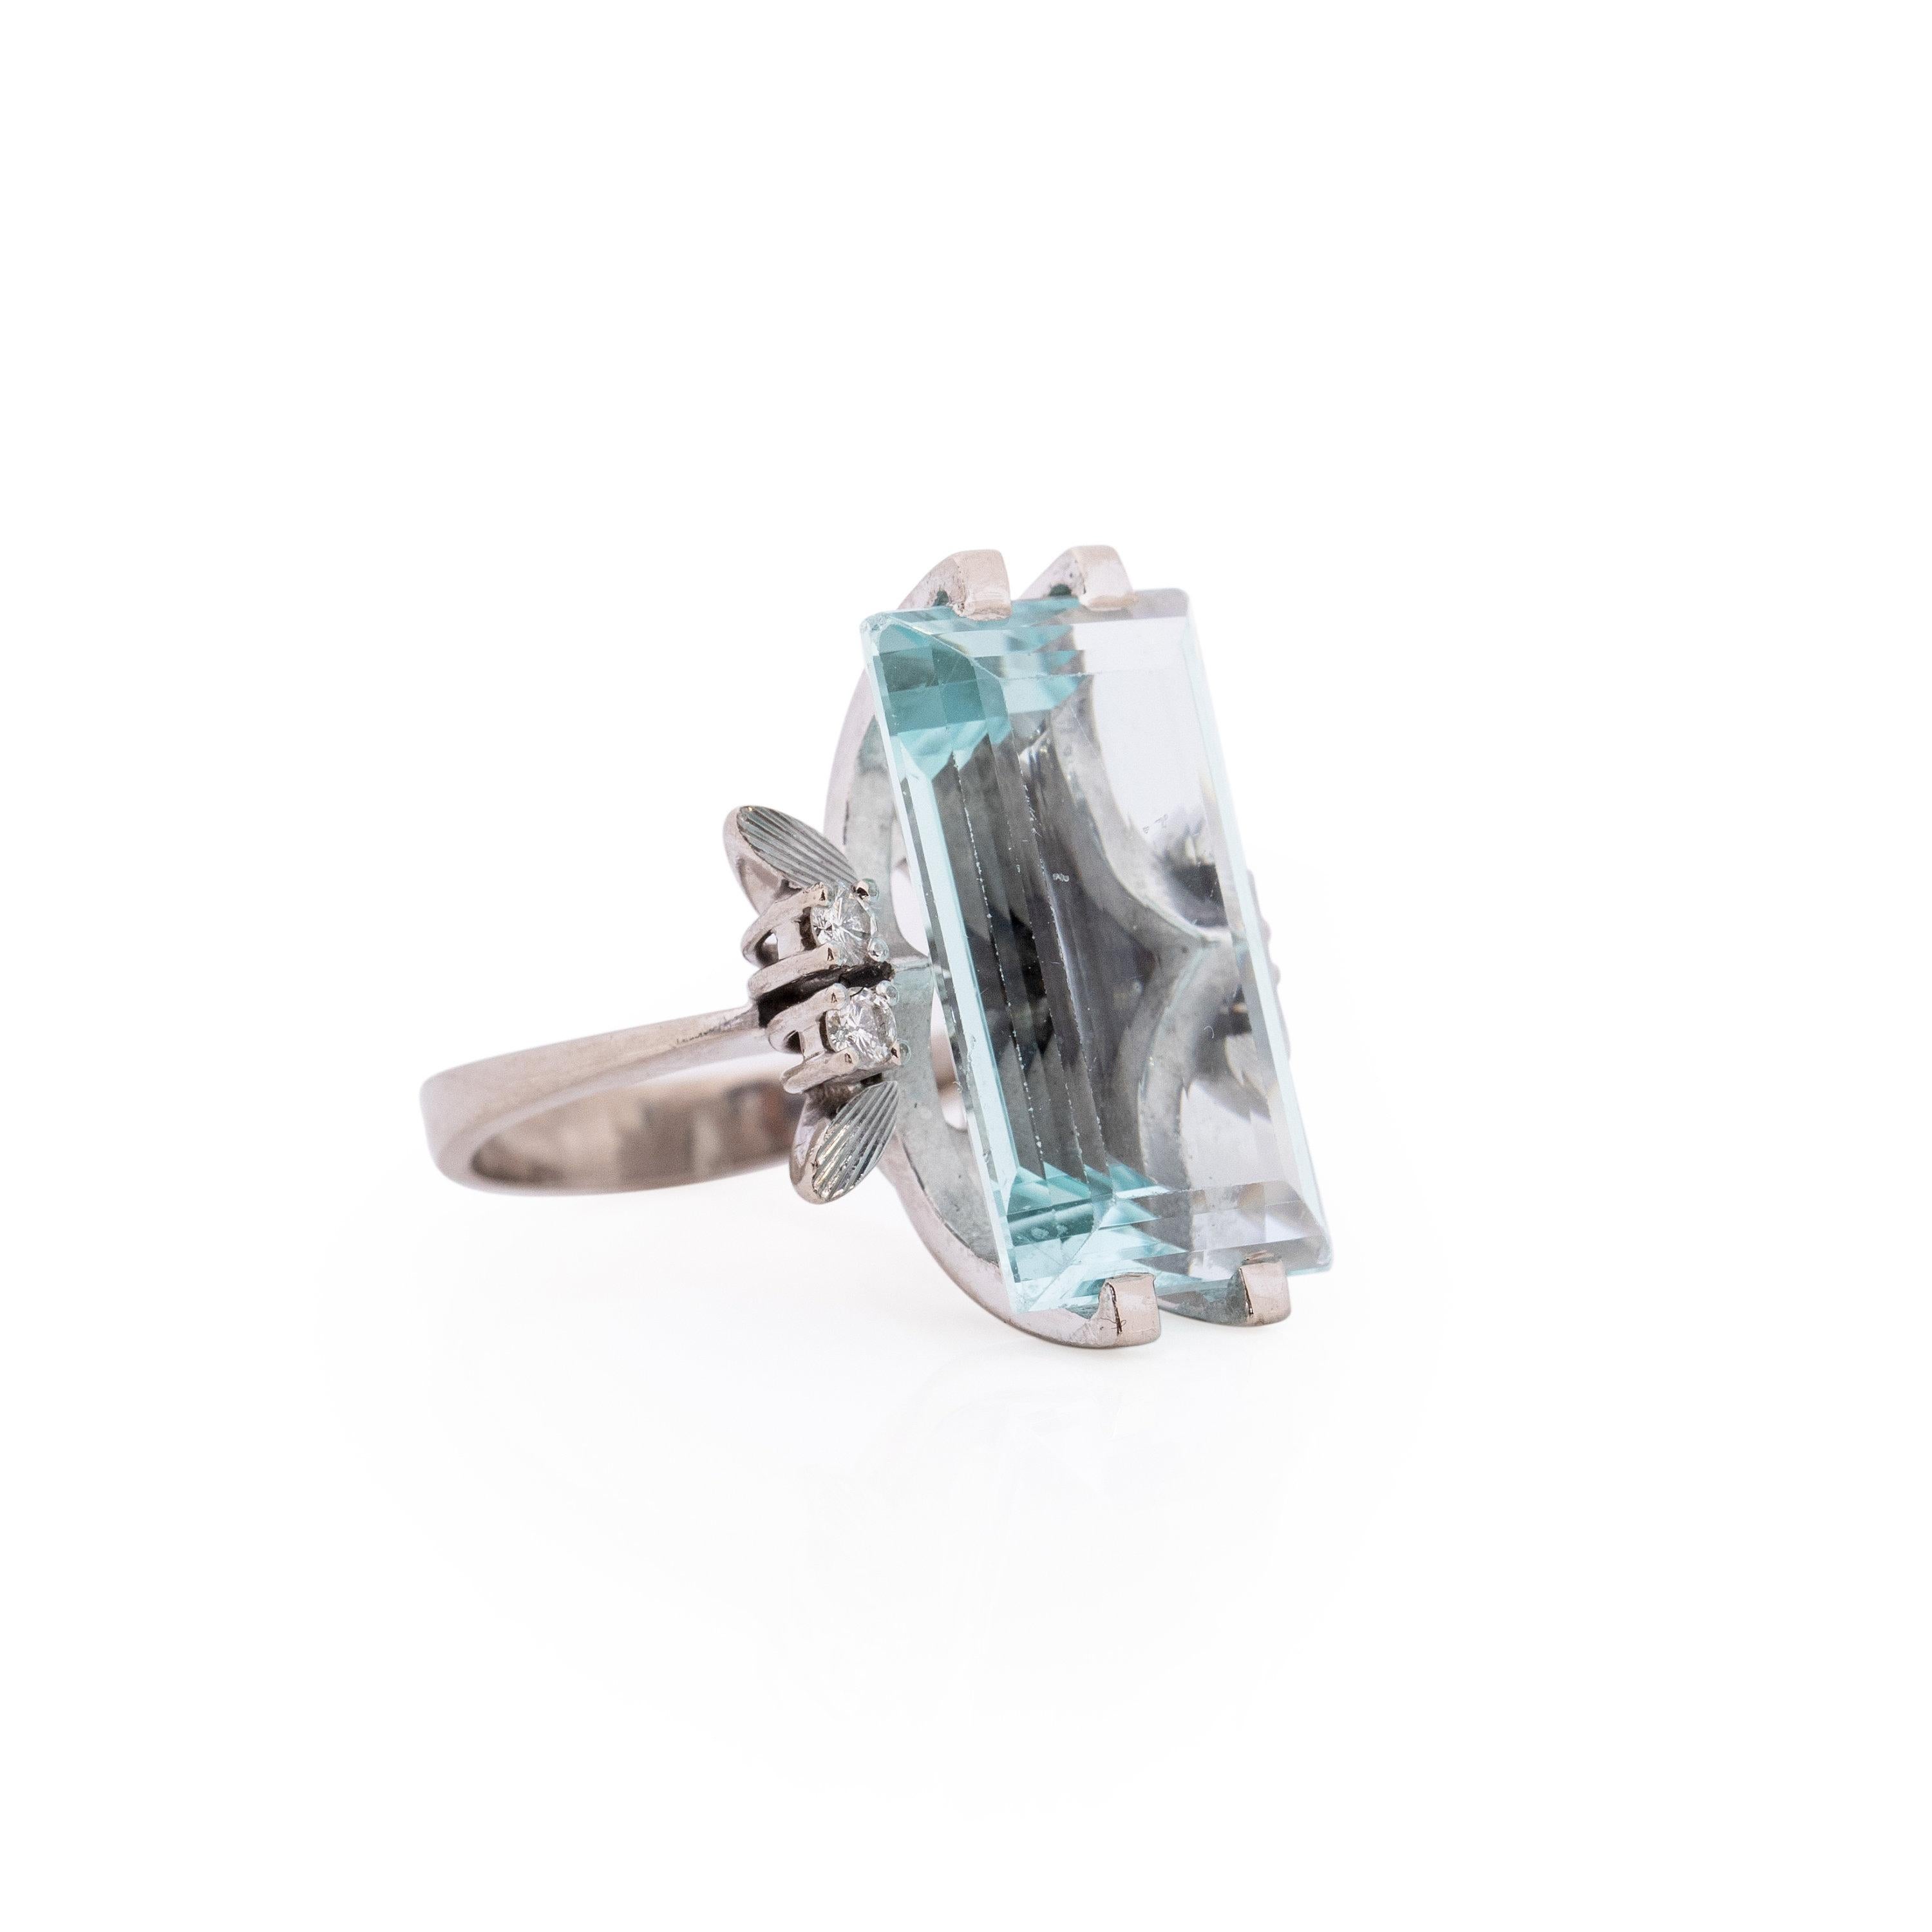 Behold this captivating aquamarine ring inspired by the retro charm of the 1980s. Encased within an understated yet refined 18K white gold setting, the aquamarine steals the spotlight, while intricate diamond accents elevate the entire design.